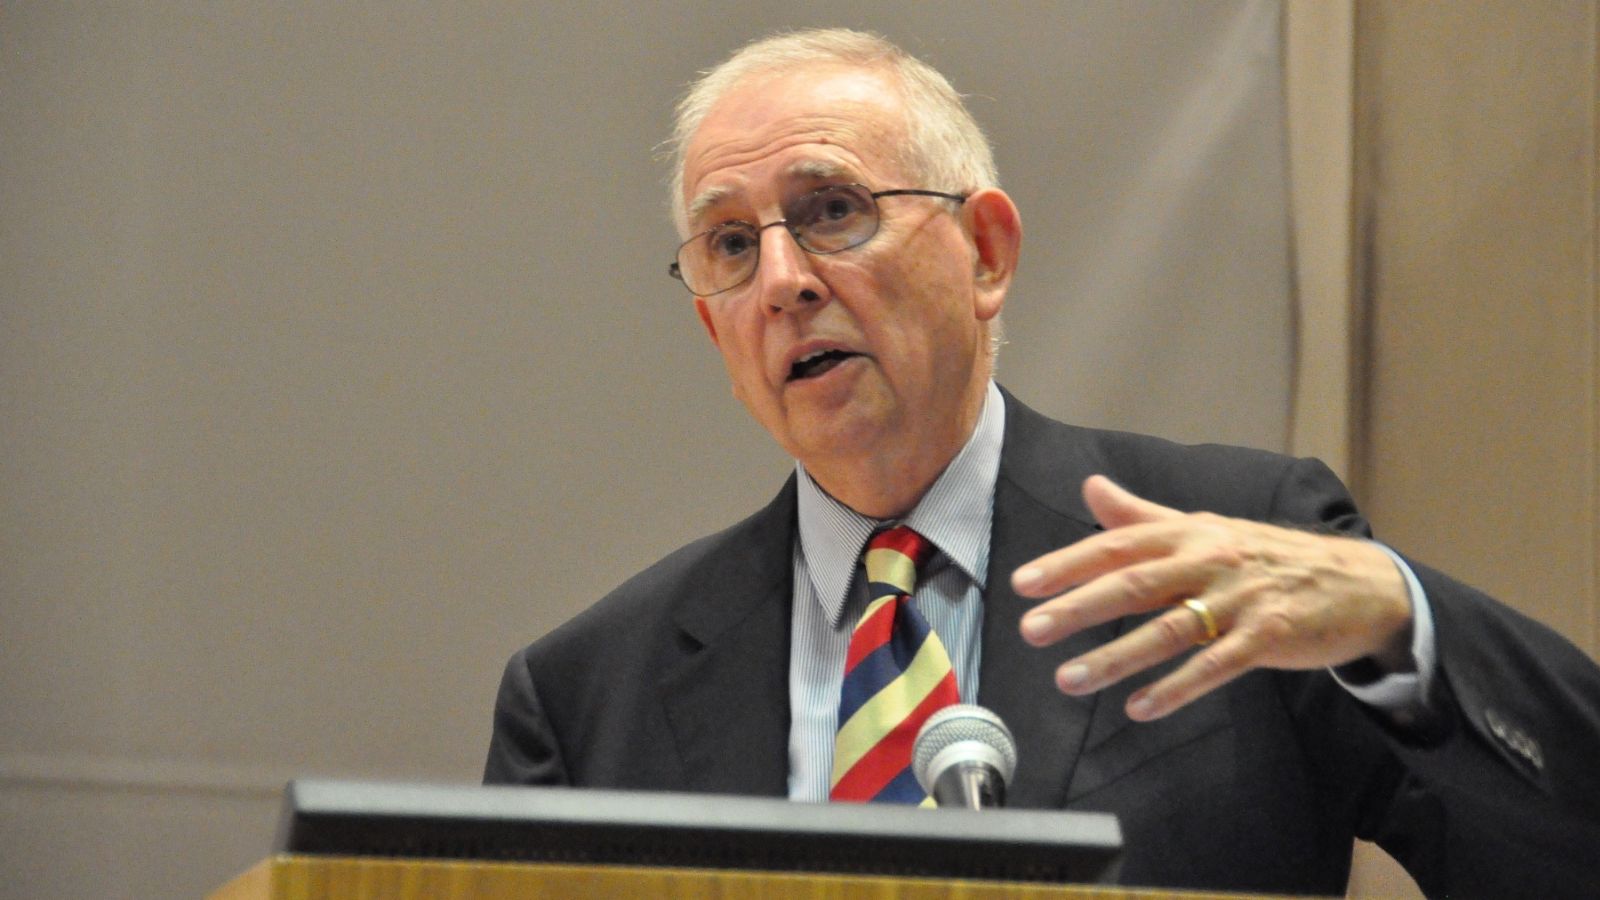 Dr Hugh Mackay speaking during a presentation at a lectern. Photo supplied by Hugh Mackay.